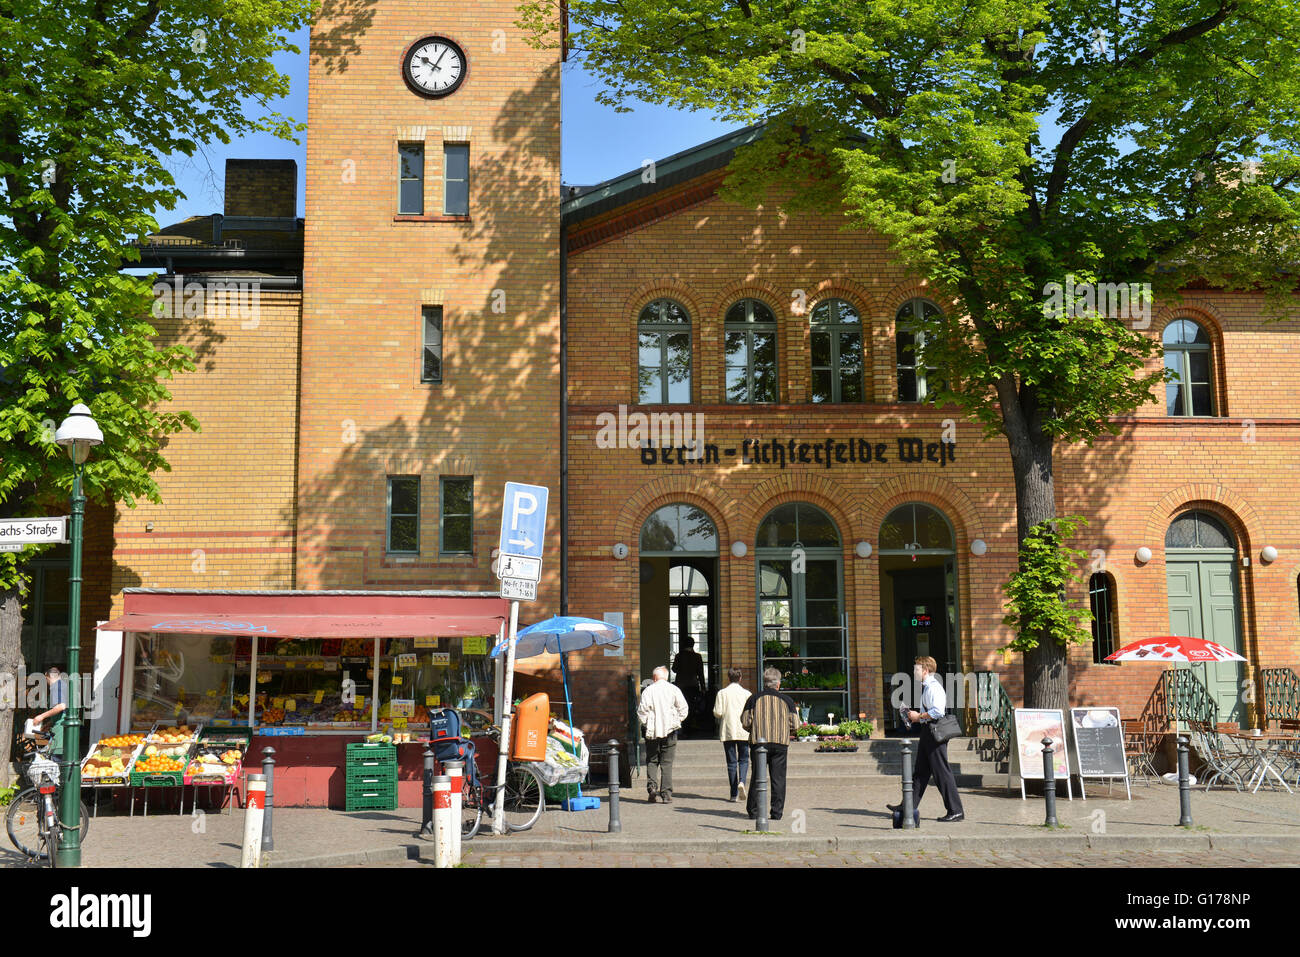 Bahnhof Strasse High Resolution Stock Photography and Images - Alamy